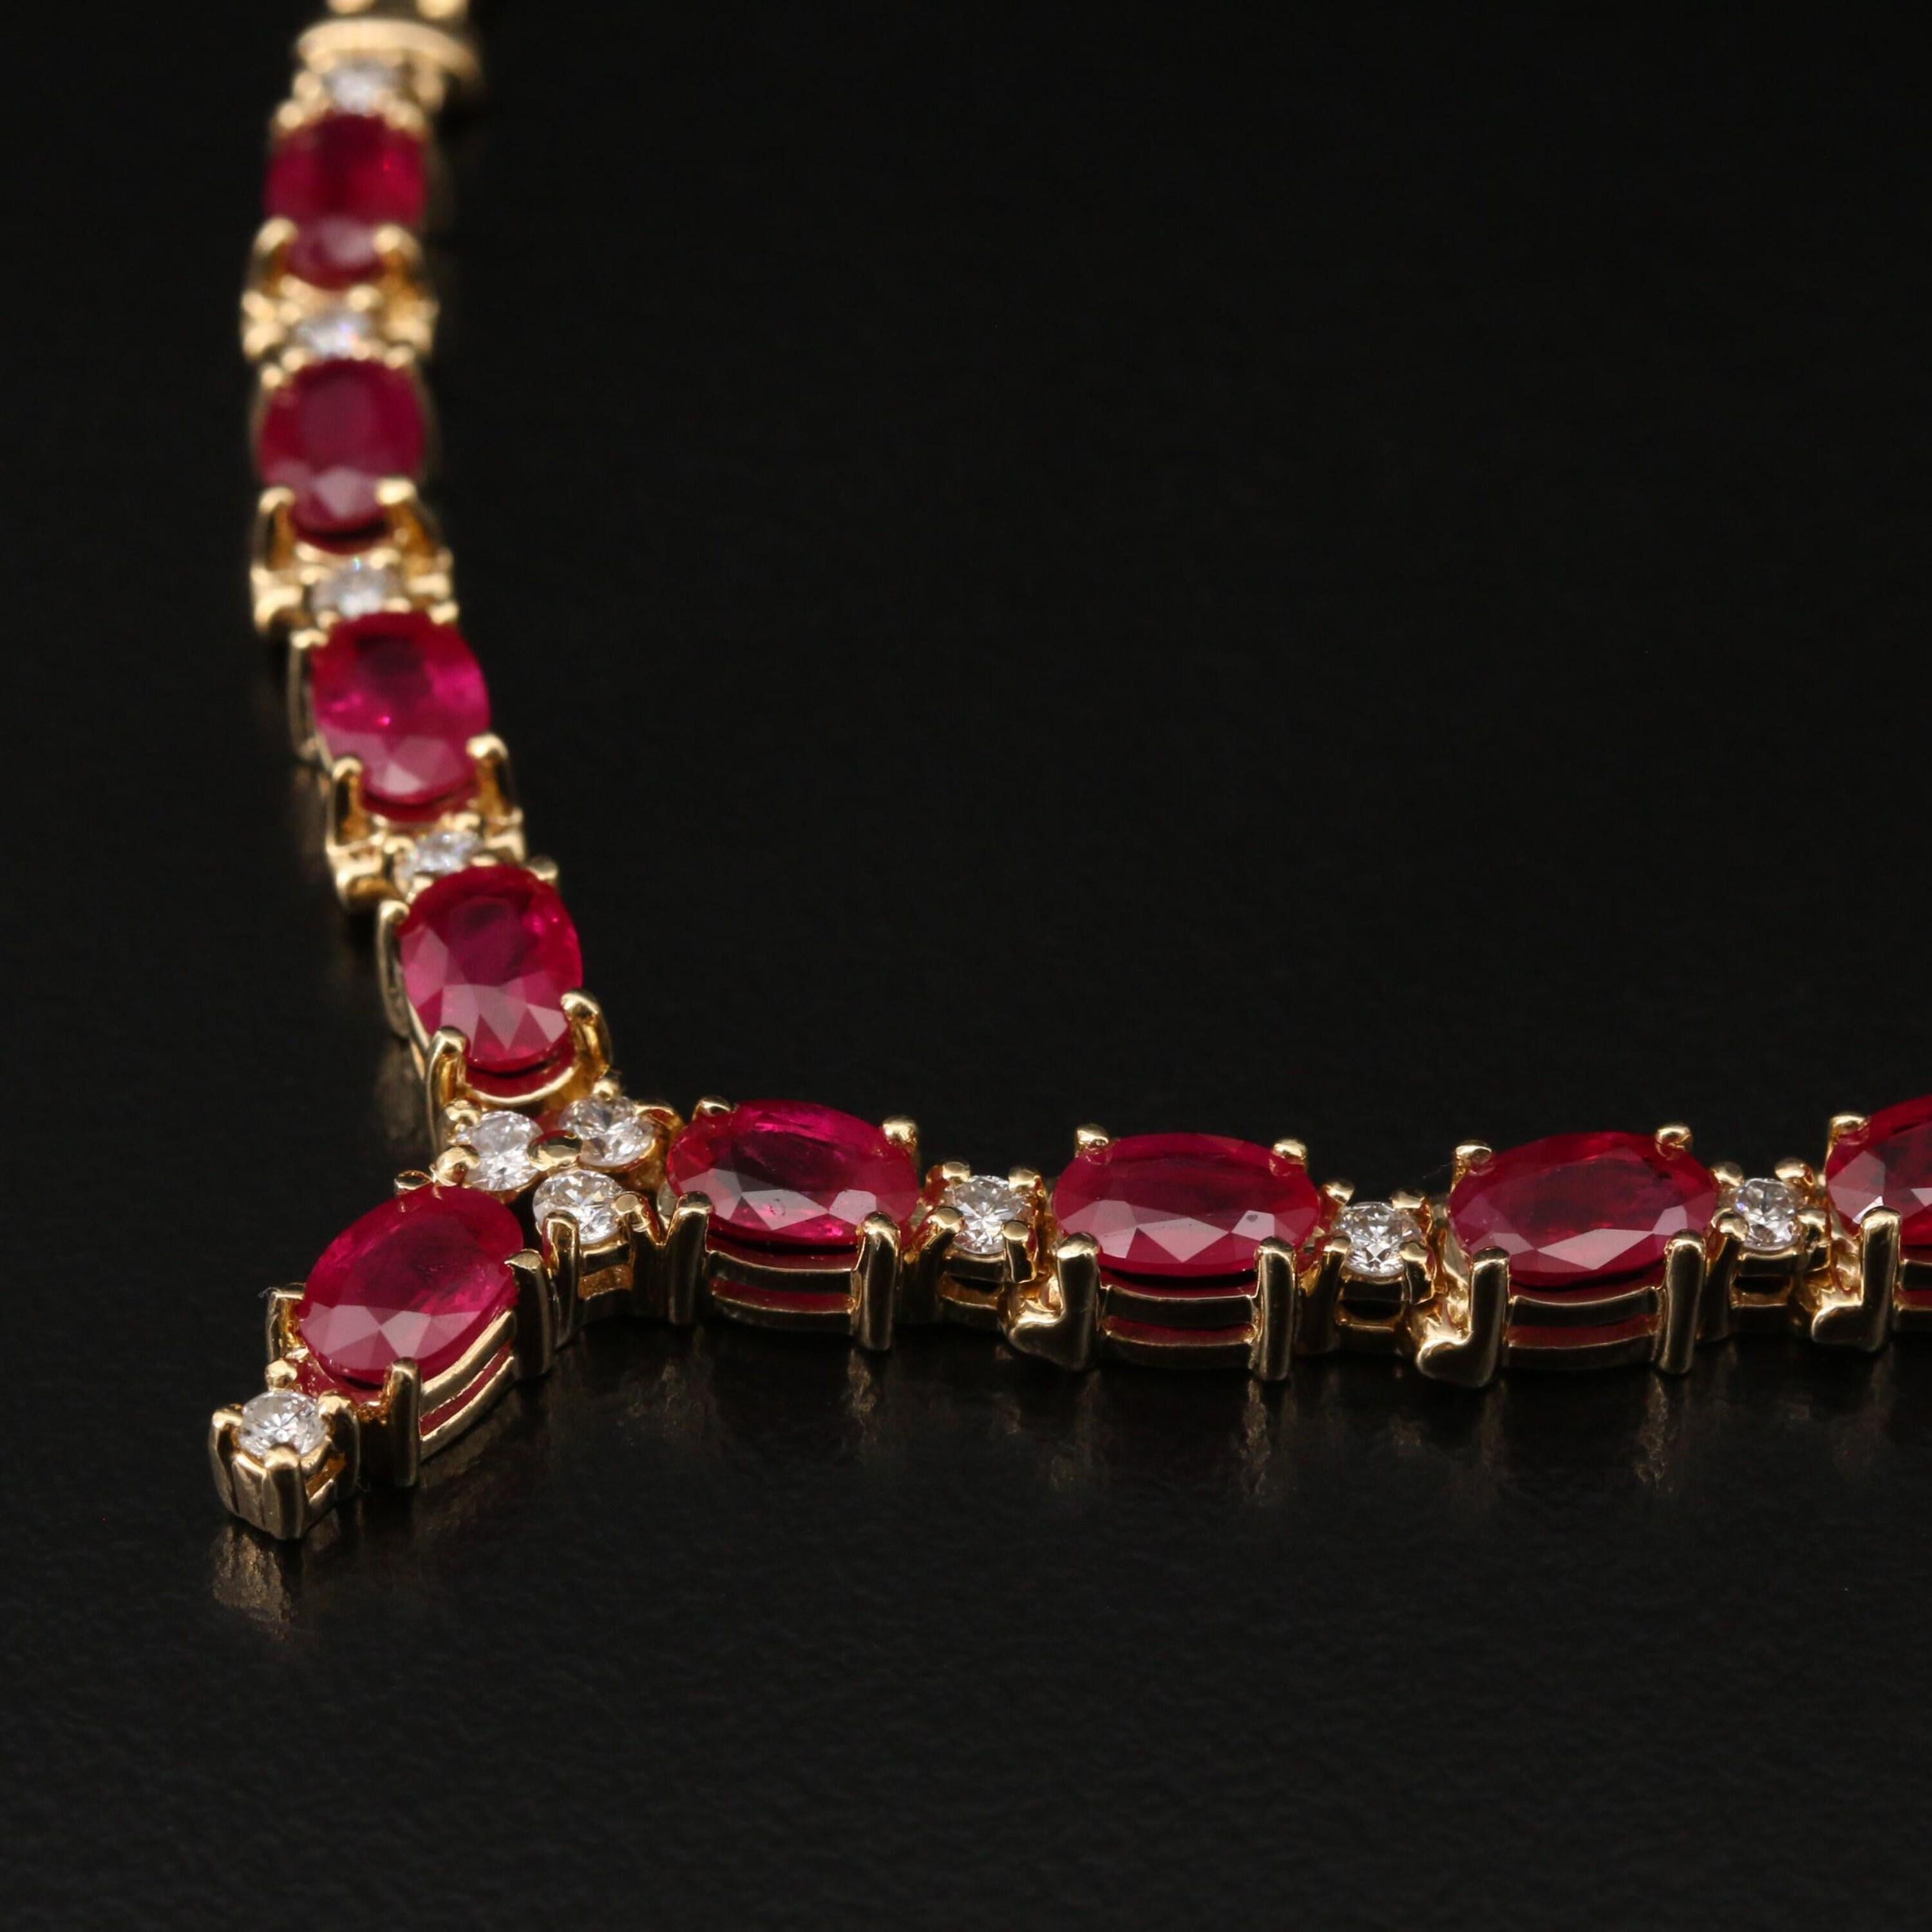 Unique Marquise Cut Ruby Diamonds Gold Necklace, 18K Yellow Gold Ruby Diamond Necklace For Her, Vintage Diamond Bridal Necklace
 
 Item Description
 → Handmade, Made to order
 → Material: SOLID 18K/18K GOLD
 
 Stone Details :
 
 Primary Stone(s)